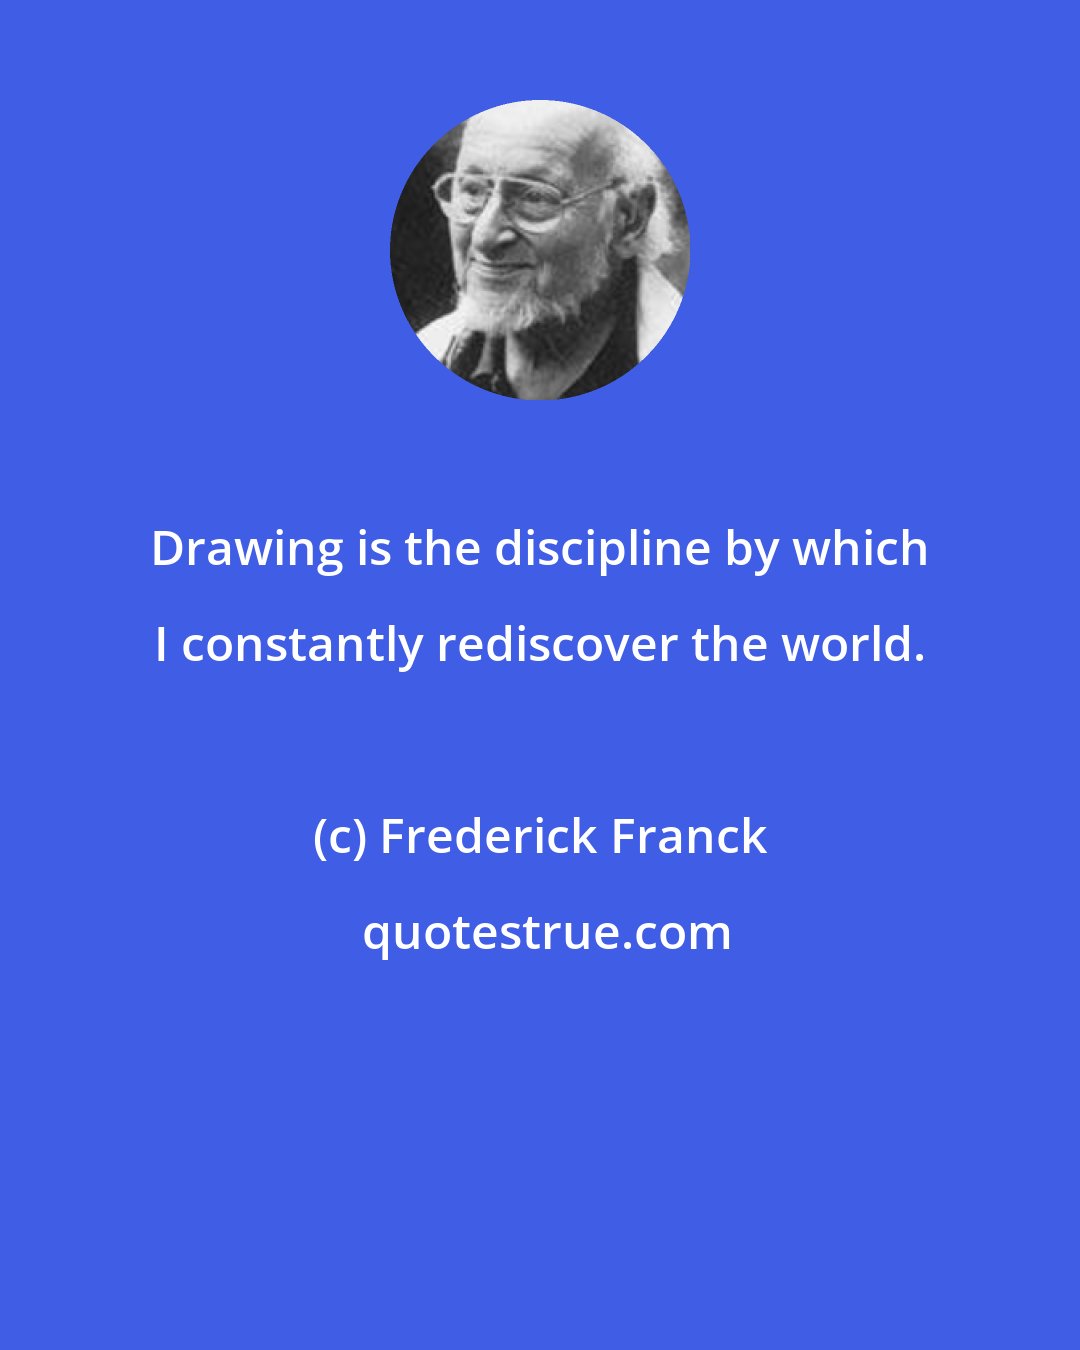 Frederick Franck: Drawing is the discipline by which I constantly rediscover the world.